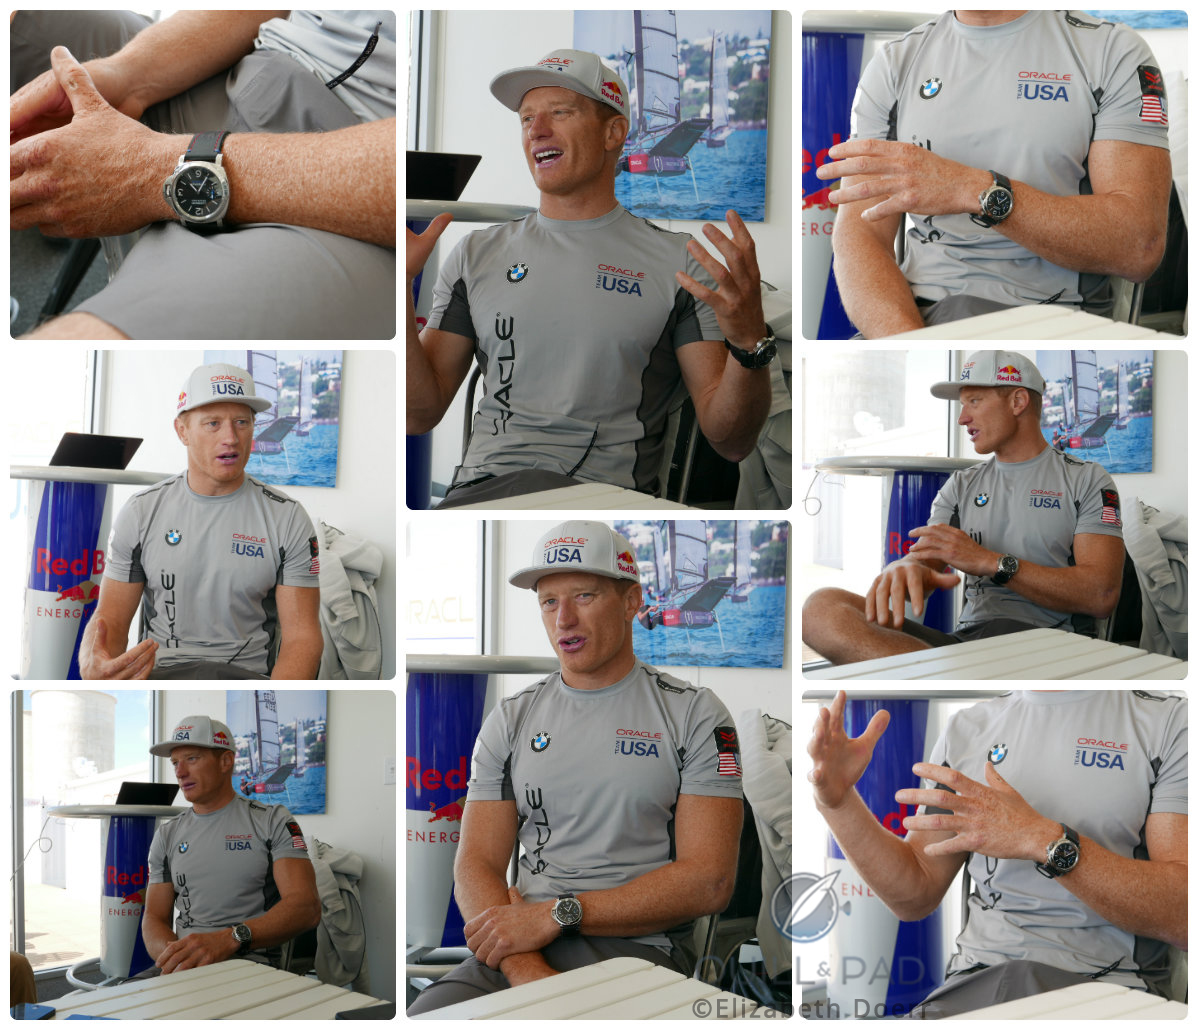 immy Spithill, skipper of Oracle Team USA, speaks expressively with the Panerai Luminor Marina Oracle Team USA 8 Days Acciaio on his wrist at the team's Bermuda base